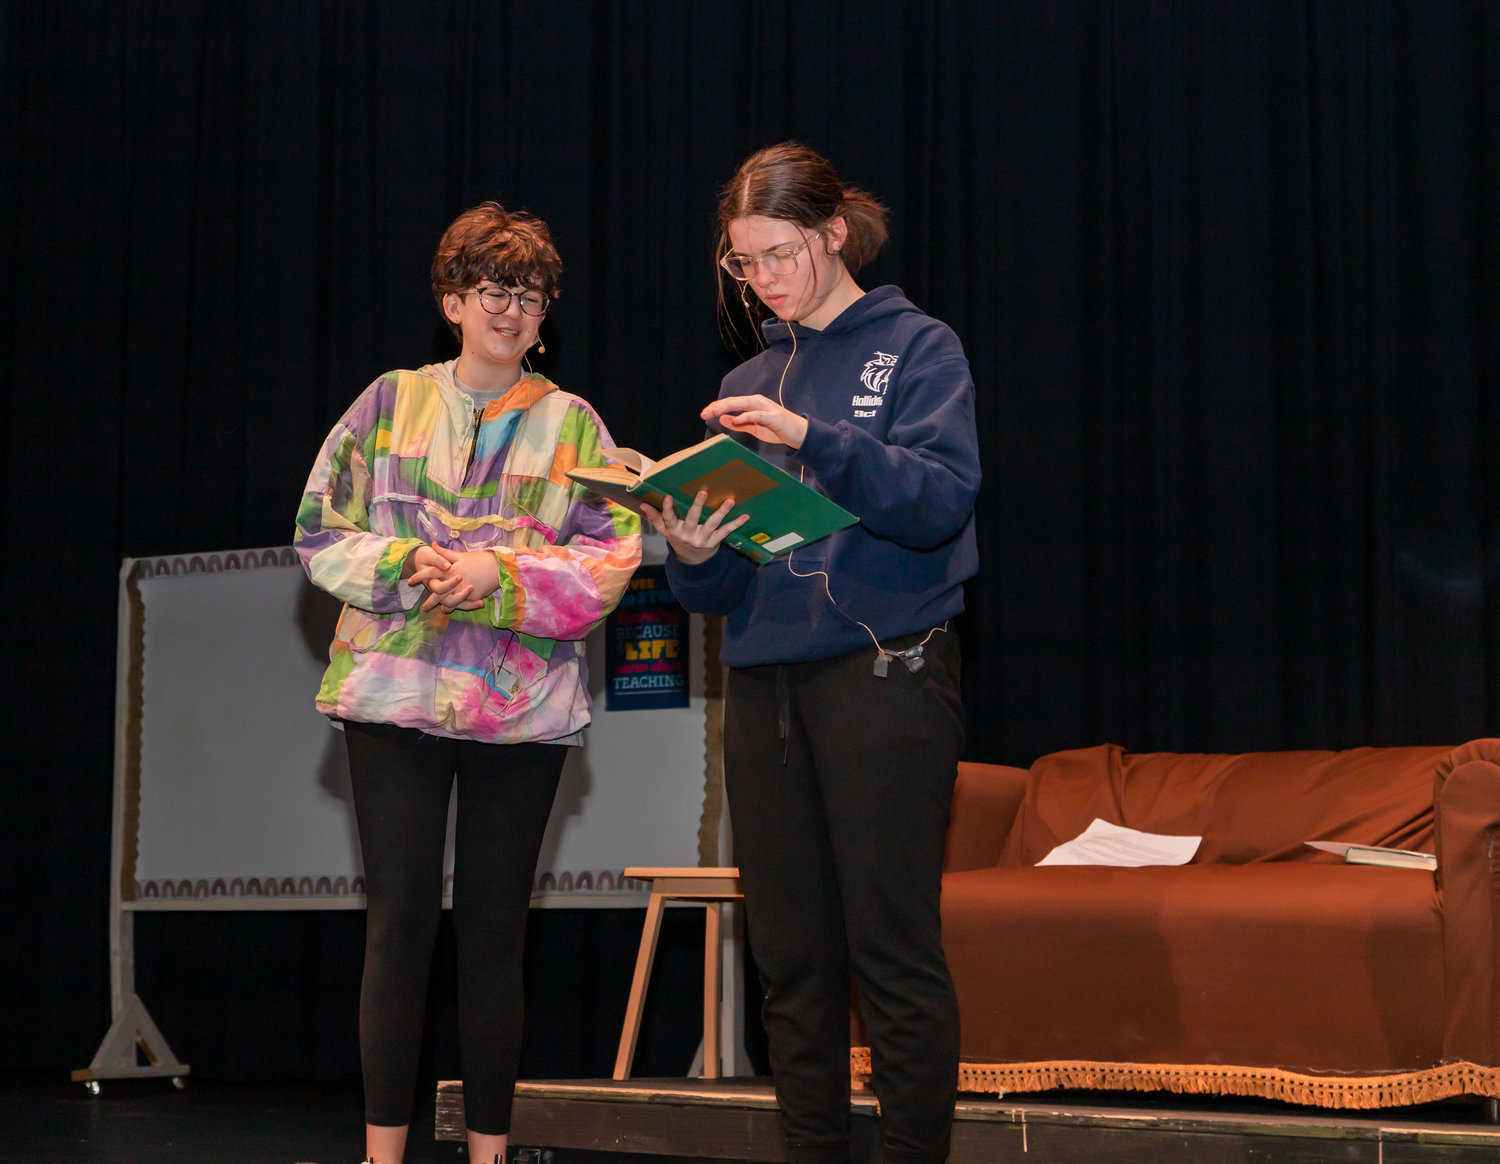 Sophie Katcher, left, is Amelia Earhart, and Paige Hull is Amelia Jones in the drama "Discovering Amelia." Moberly High School will perform the play Thursday and Friday at 7 p.m. and Saturday at 2 p.m.